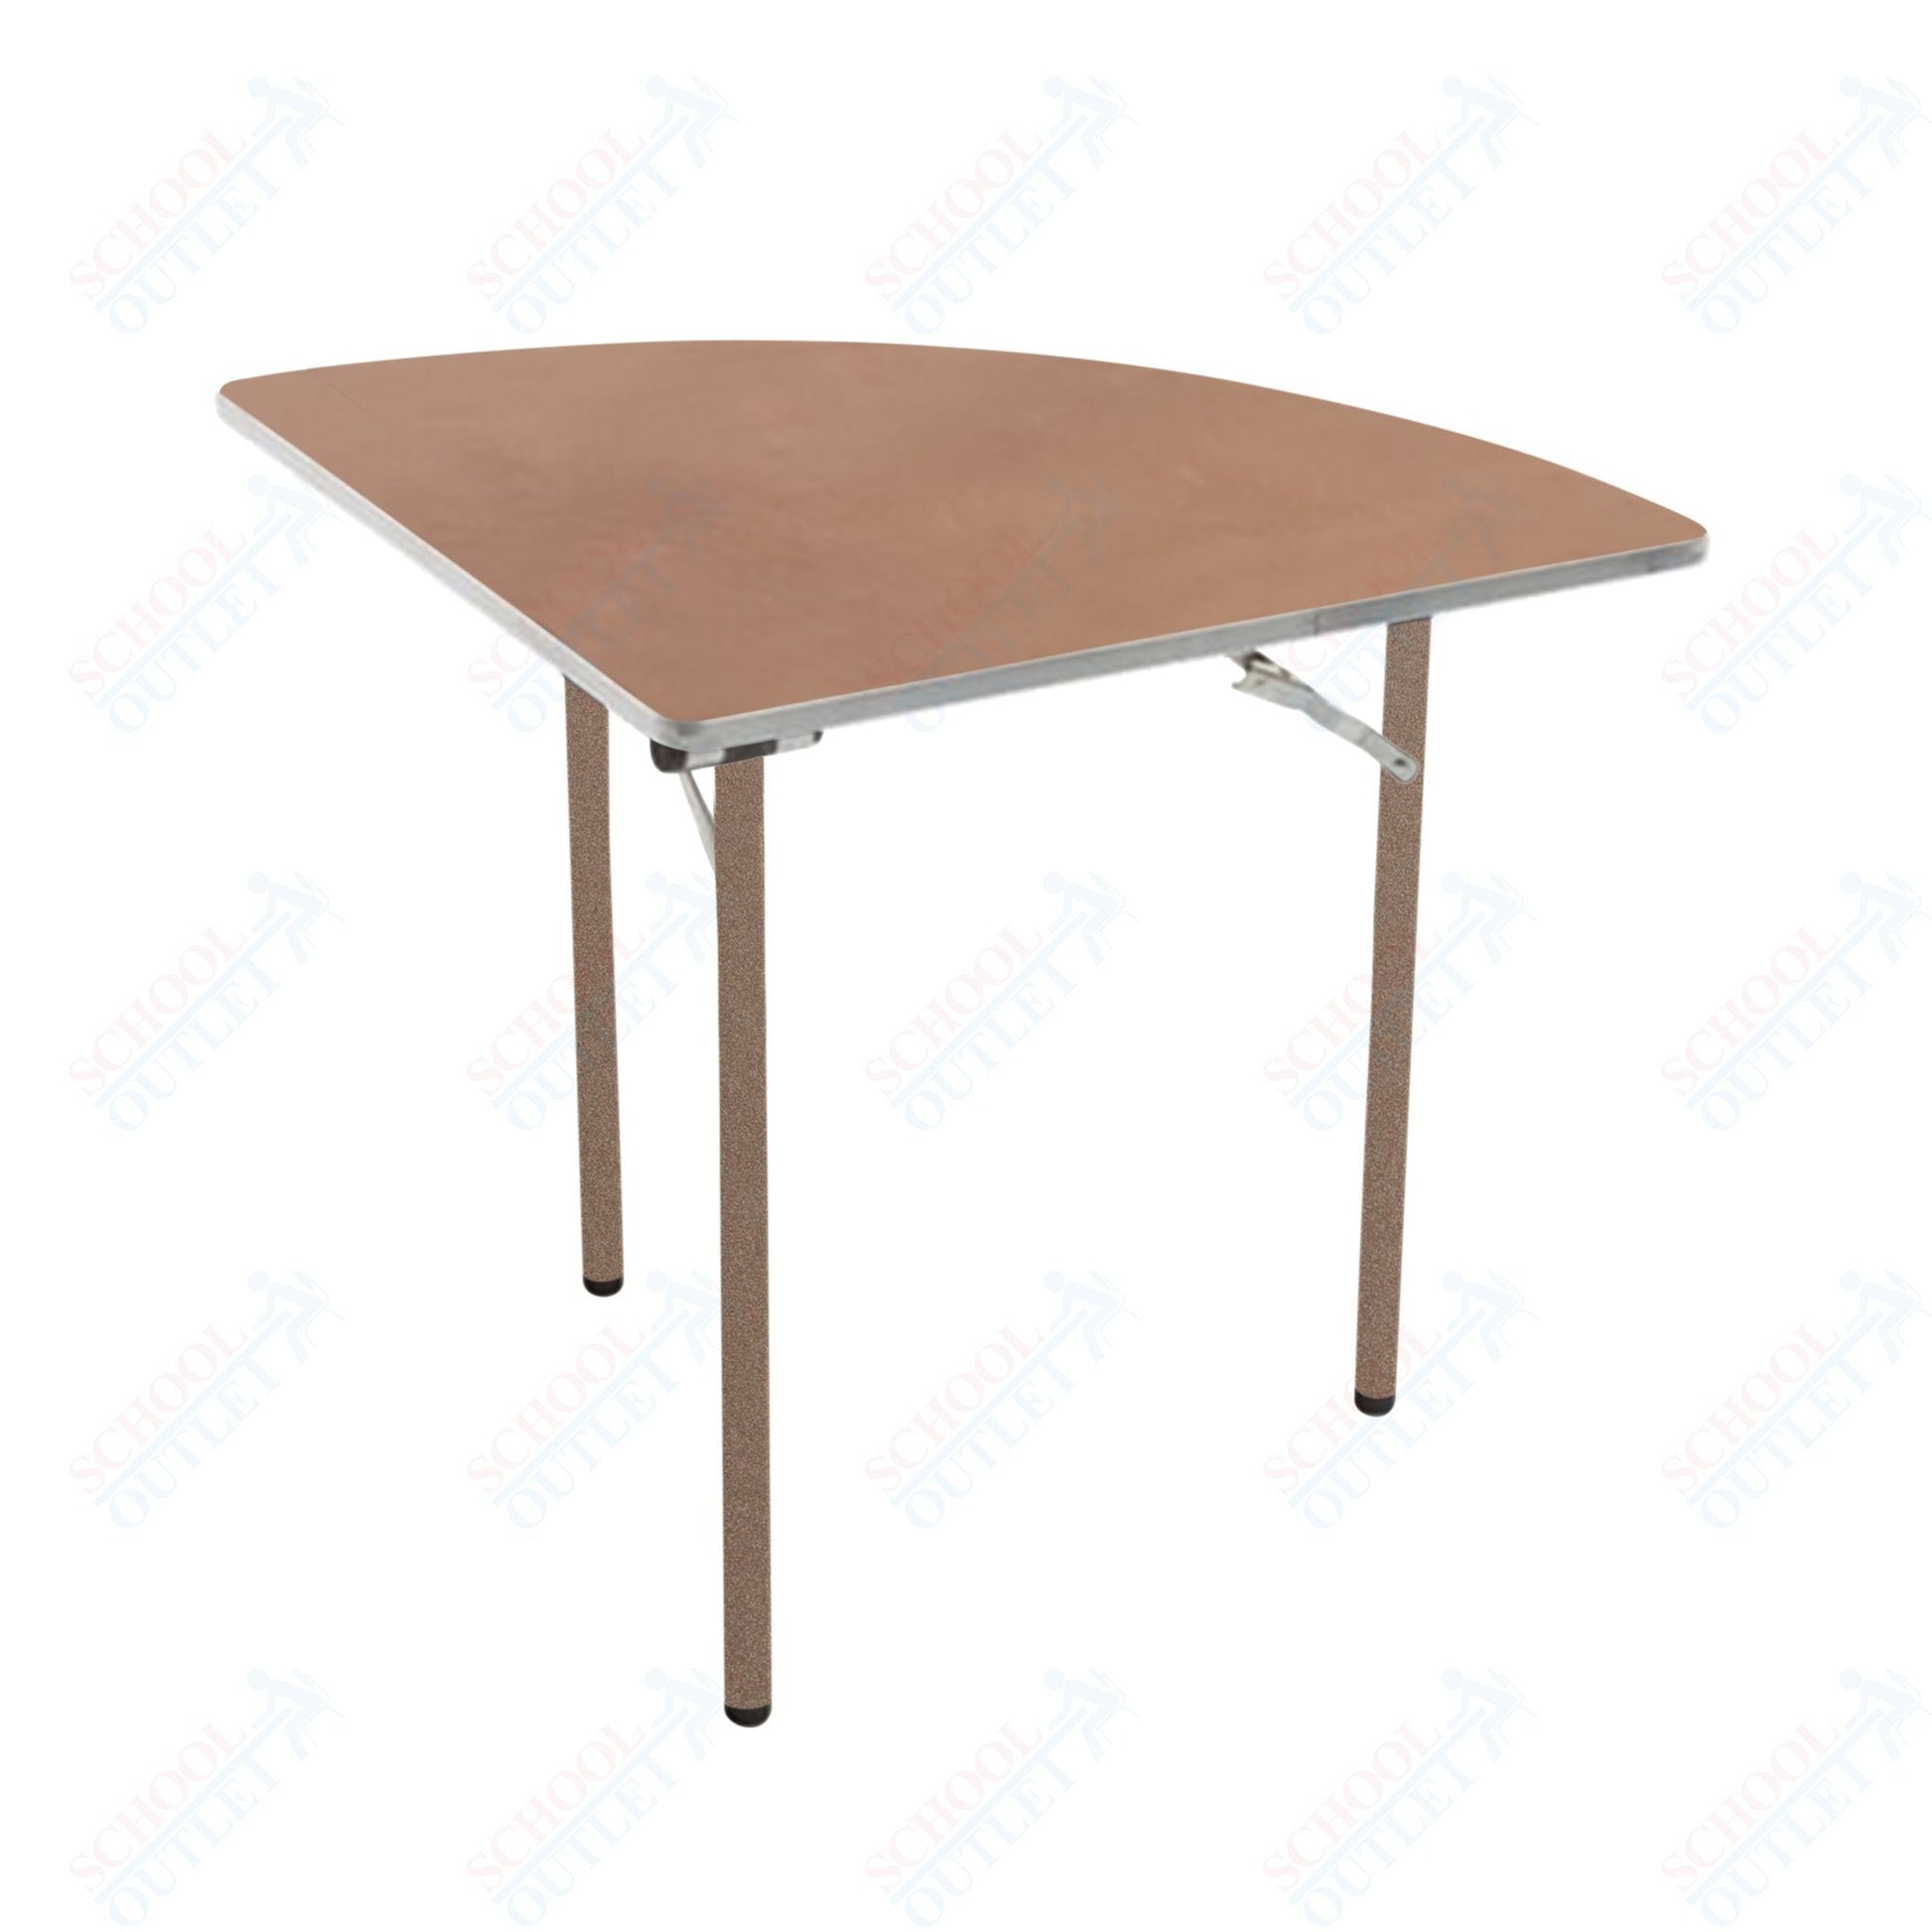 AmTab Folding Table - Plywood Stained and Sealed - Aluminum Edge - Quarter Round - Quarter 96" Diameter x 29"H (AmTab AMT - QR96PA) - SchoolOutlet